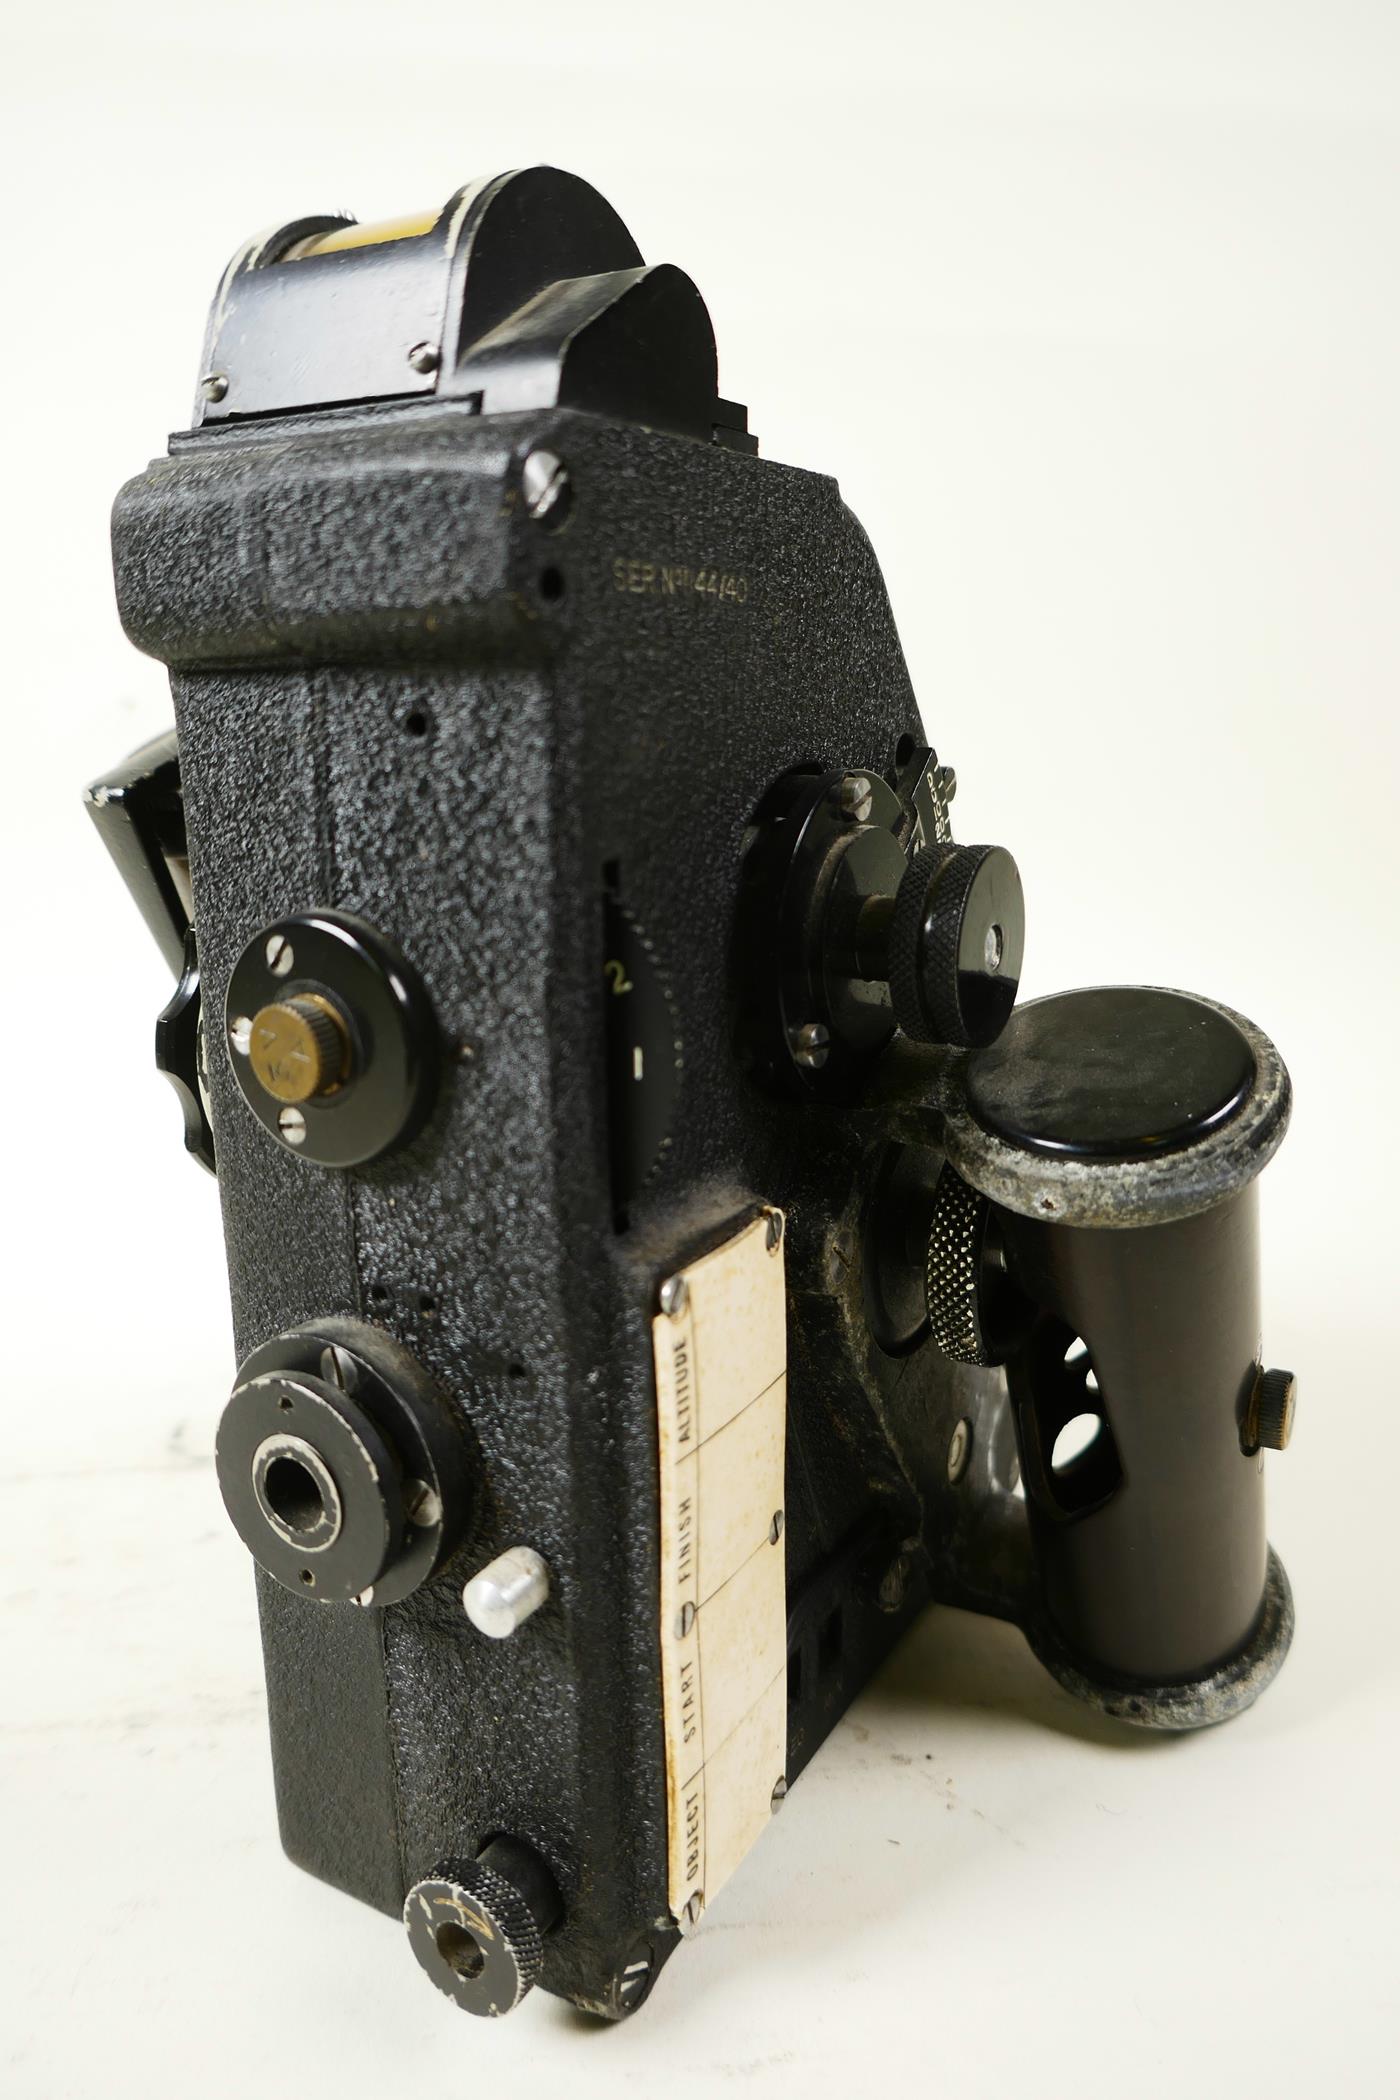 A WWII military aircraft bubble sextant mark 1x by S.S.&S. Ltd, London, ref no. 6B/151, serial no, - Image 5 of 7